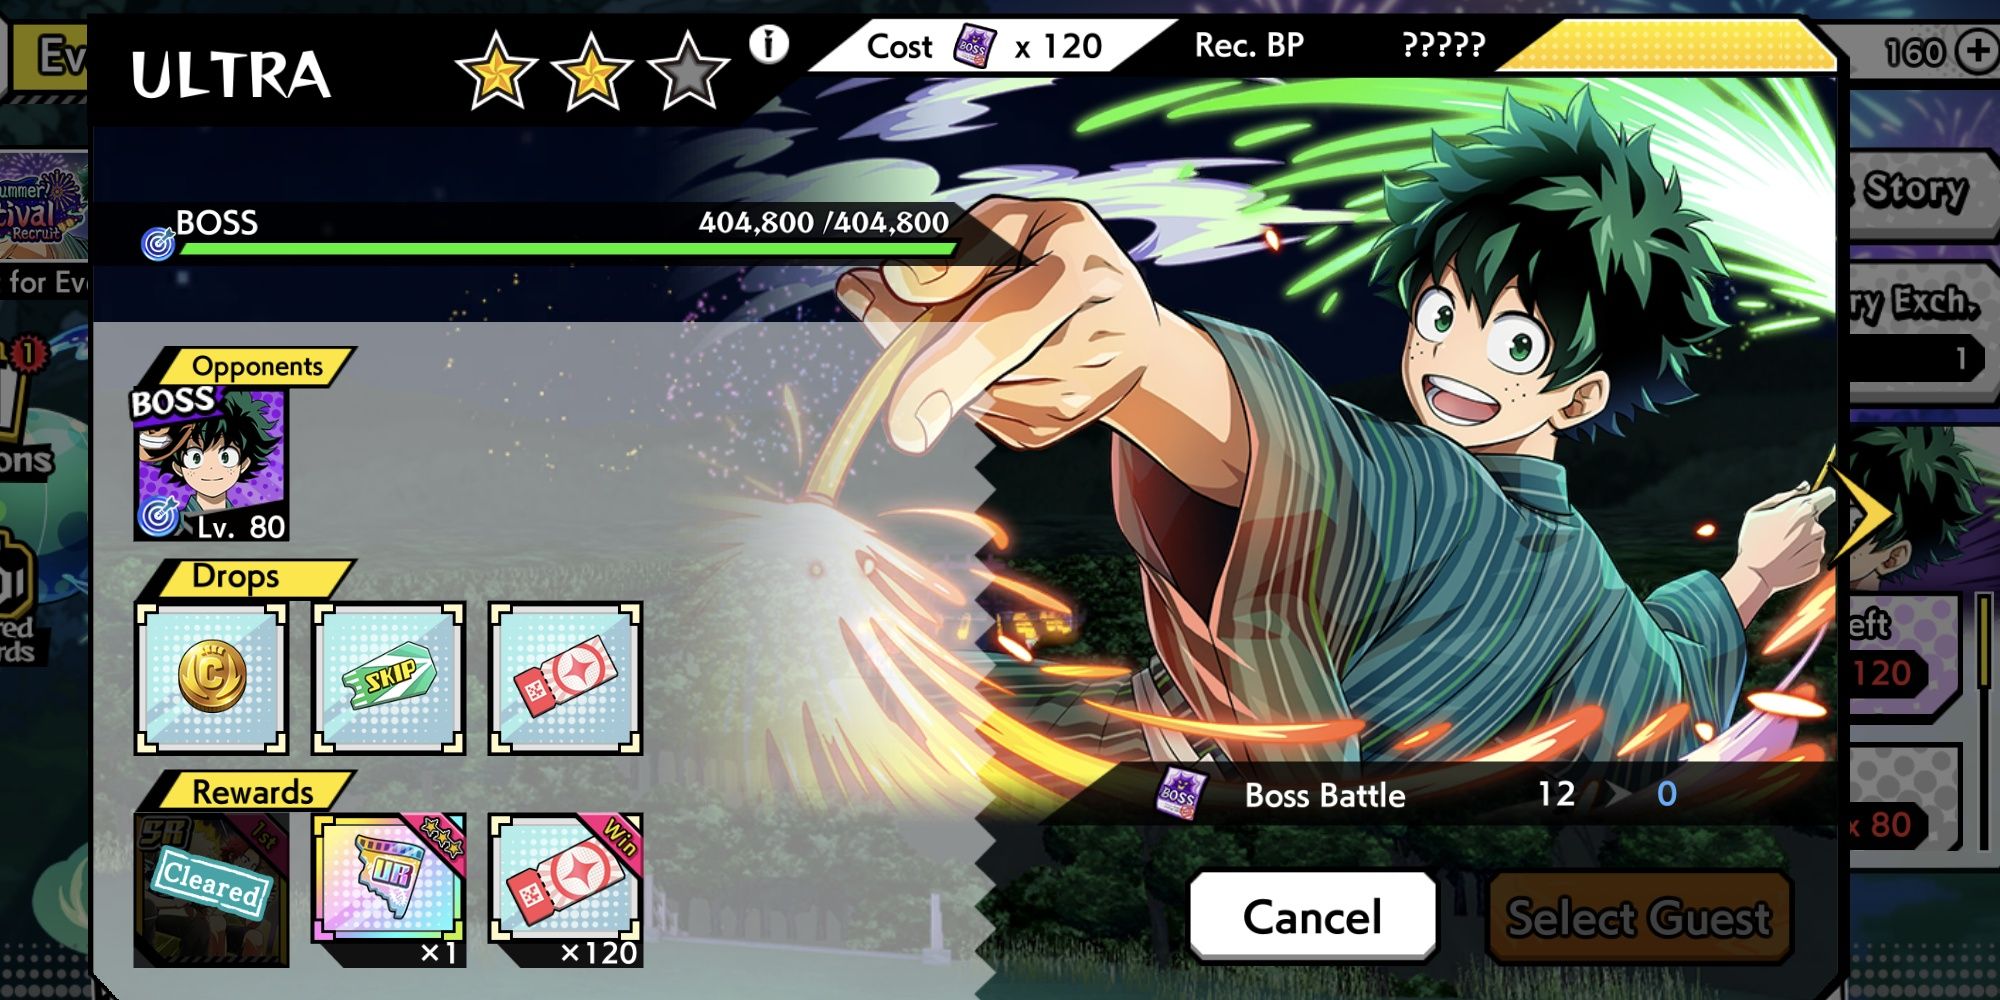 Event Boss selection page featuring Deku